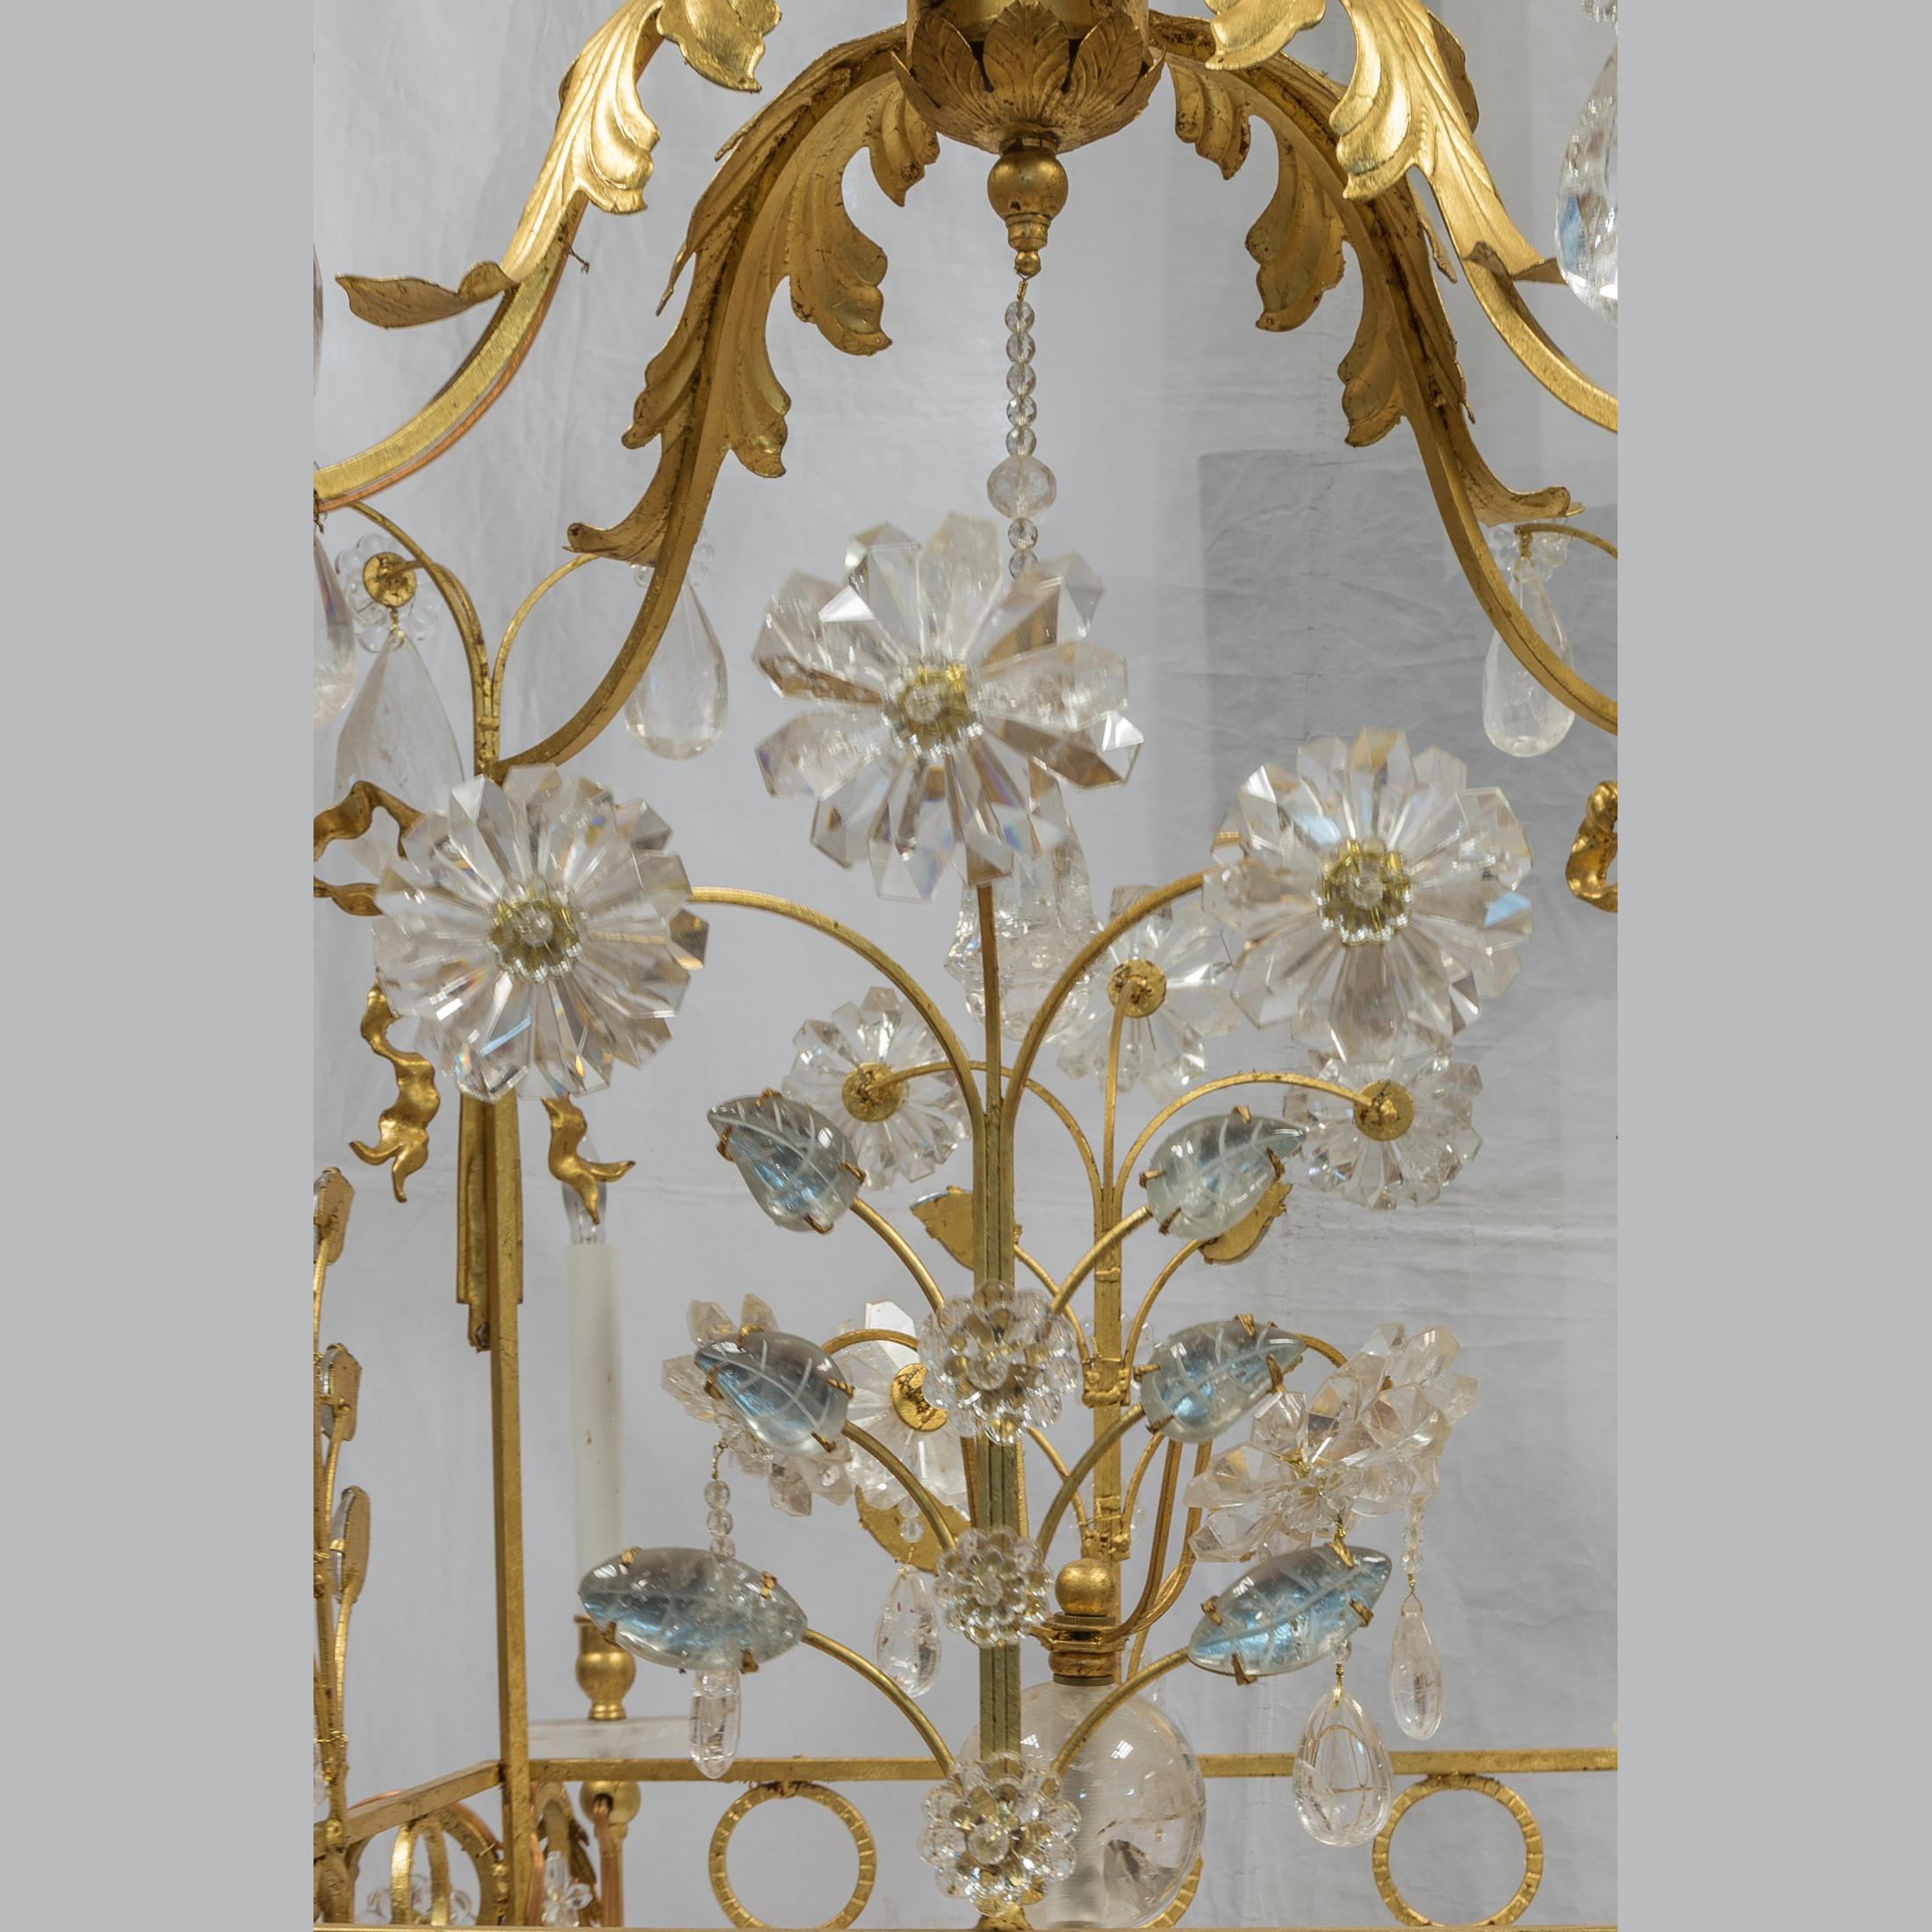  charming gilt-metal and rock crystal cage-formed eight-light chandelier mounted with multifaceted hand carved rock crystal center column and profusely mounted with rock crystal elements and drops on branches. Gilded bronze foliage and encircles the